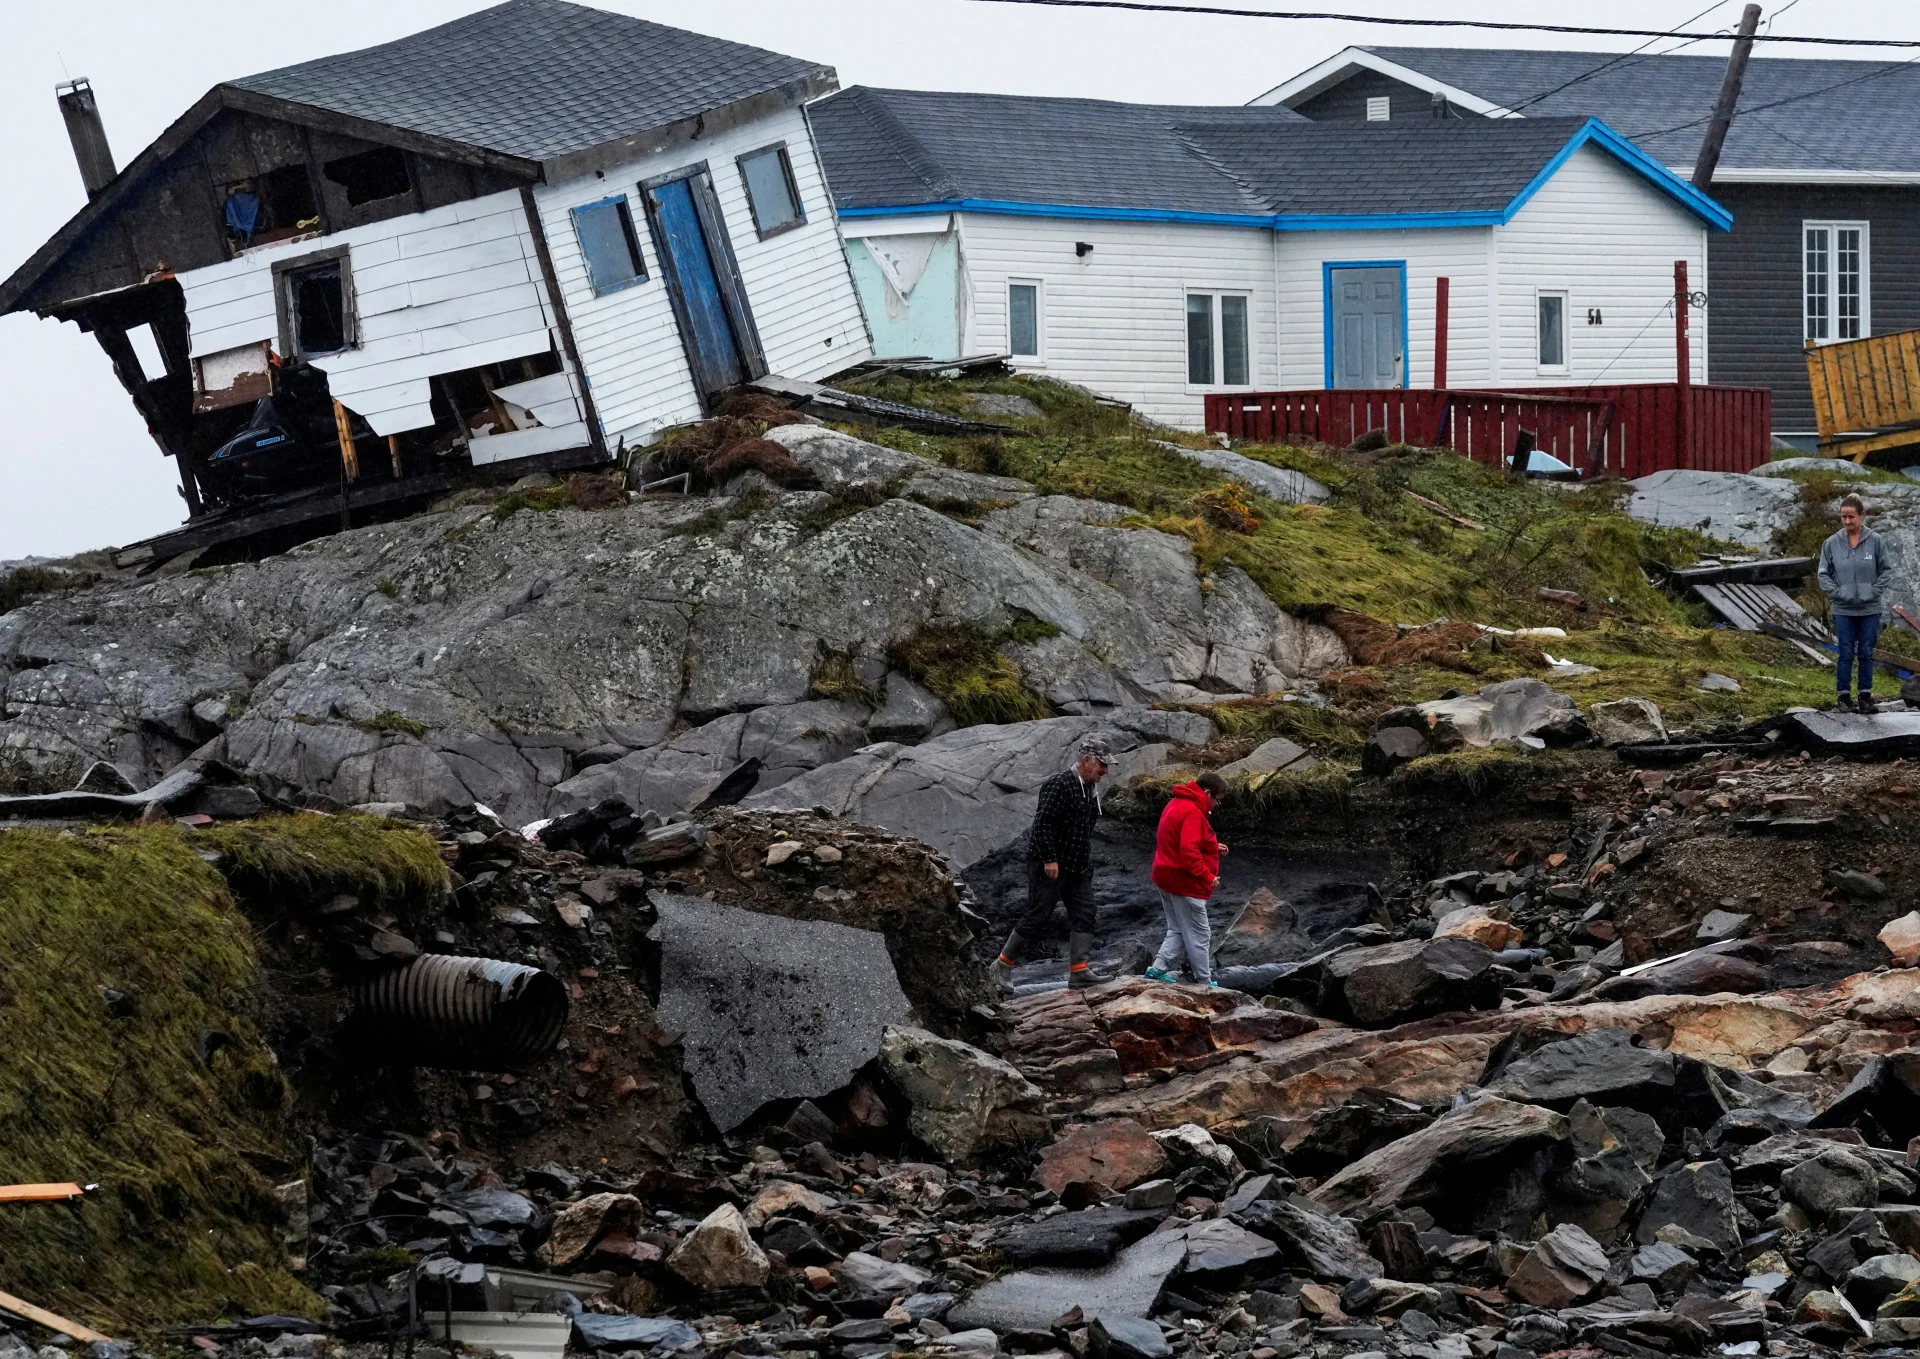 REUTERS: FILE PHOTO: Persons head to their homes in the aftermath of Hurricane Fiona in Burnt Islands, Newfoundland, Canada September 27, 2022. REUTERS/John Morris/File Photo